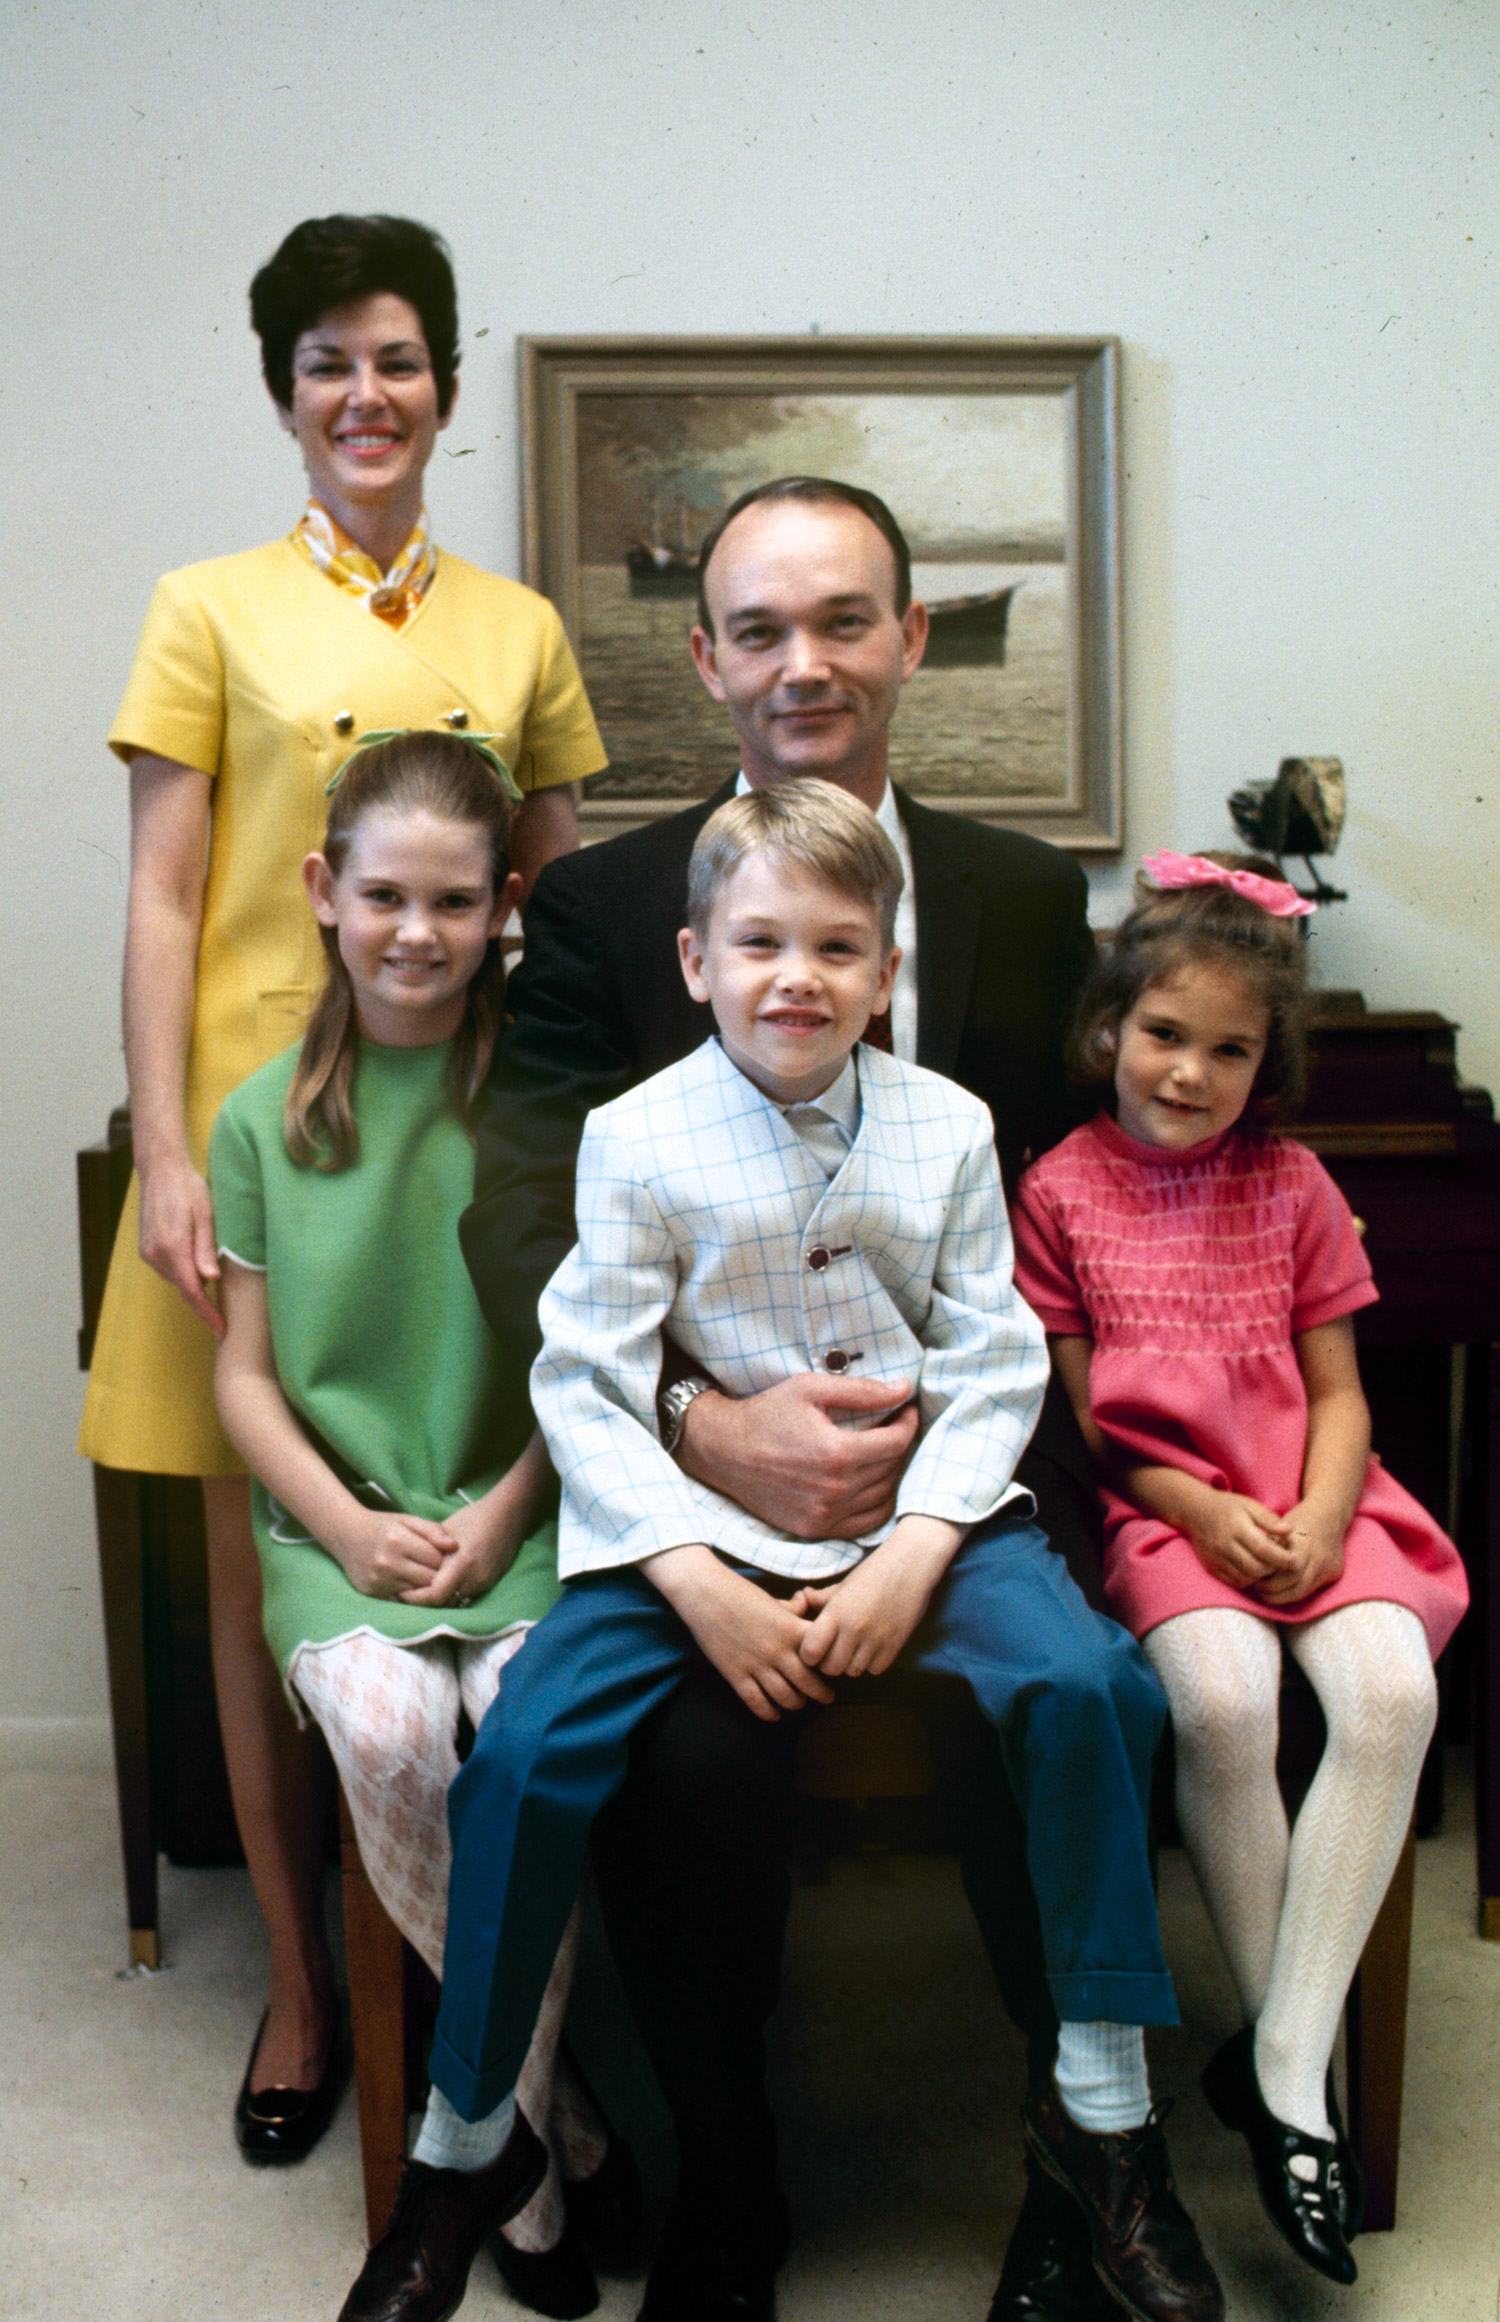 Astronaut Michael Collins and family, 1969.